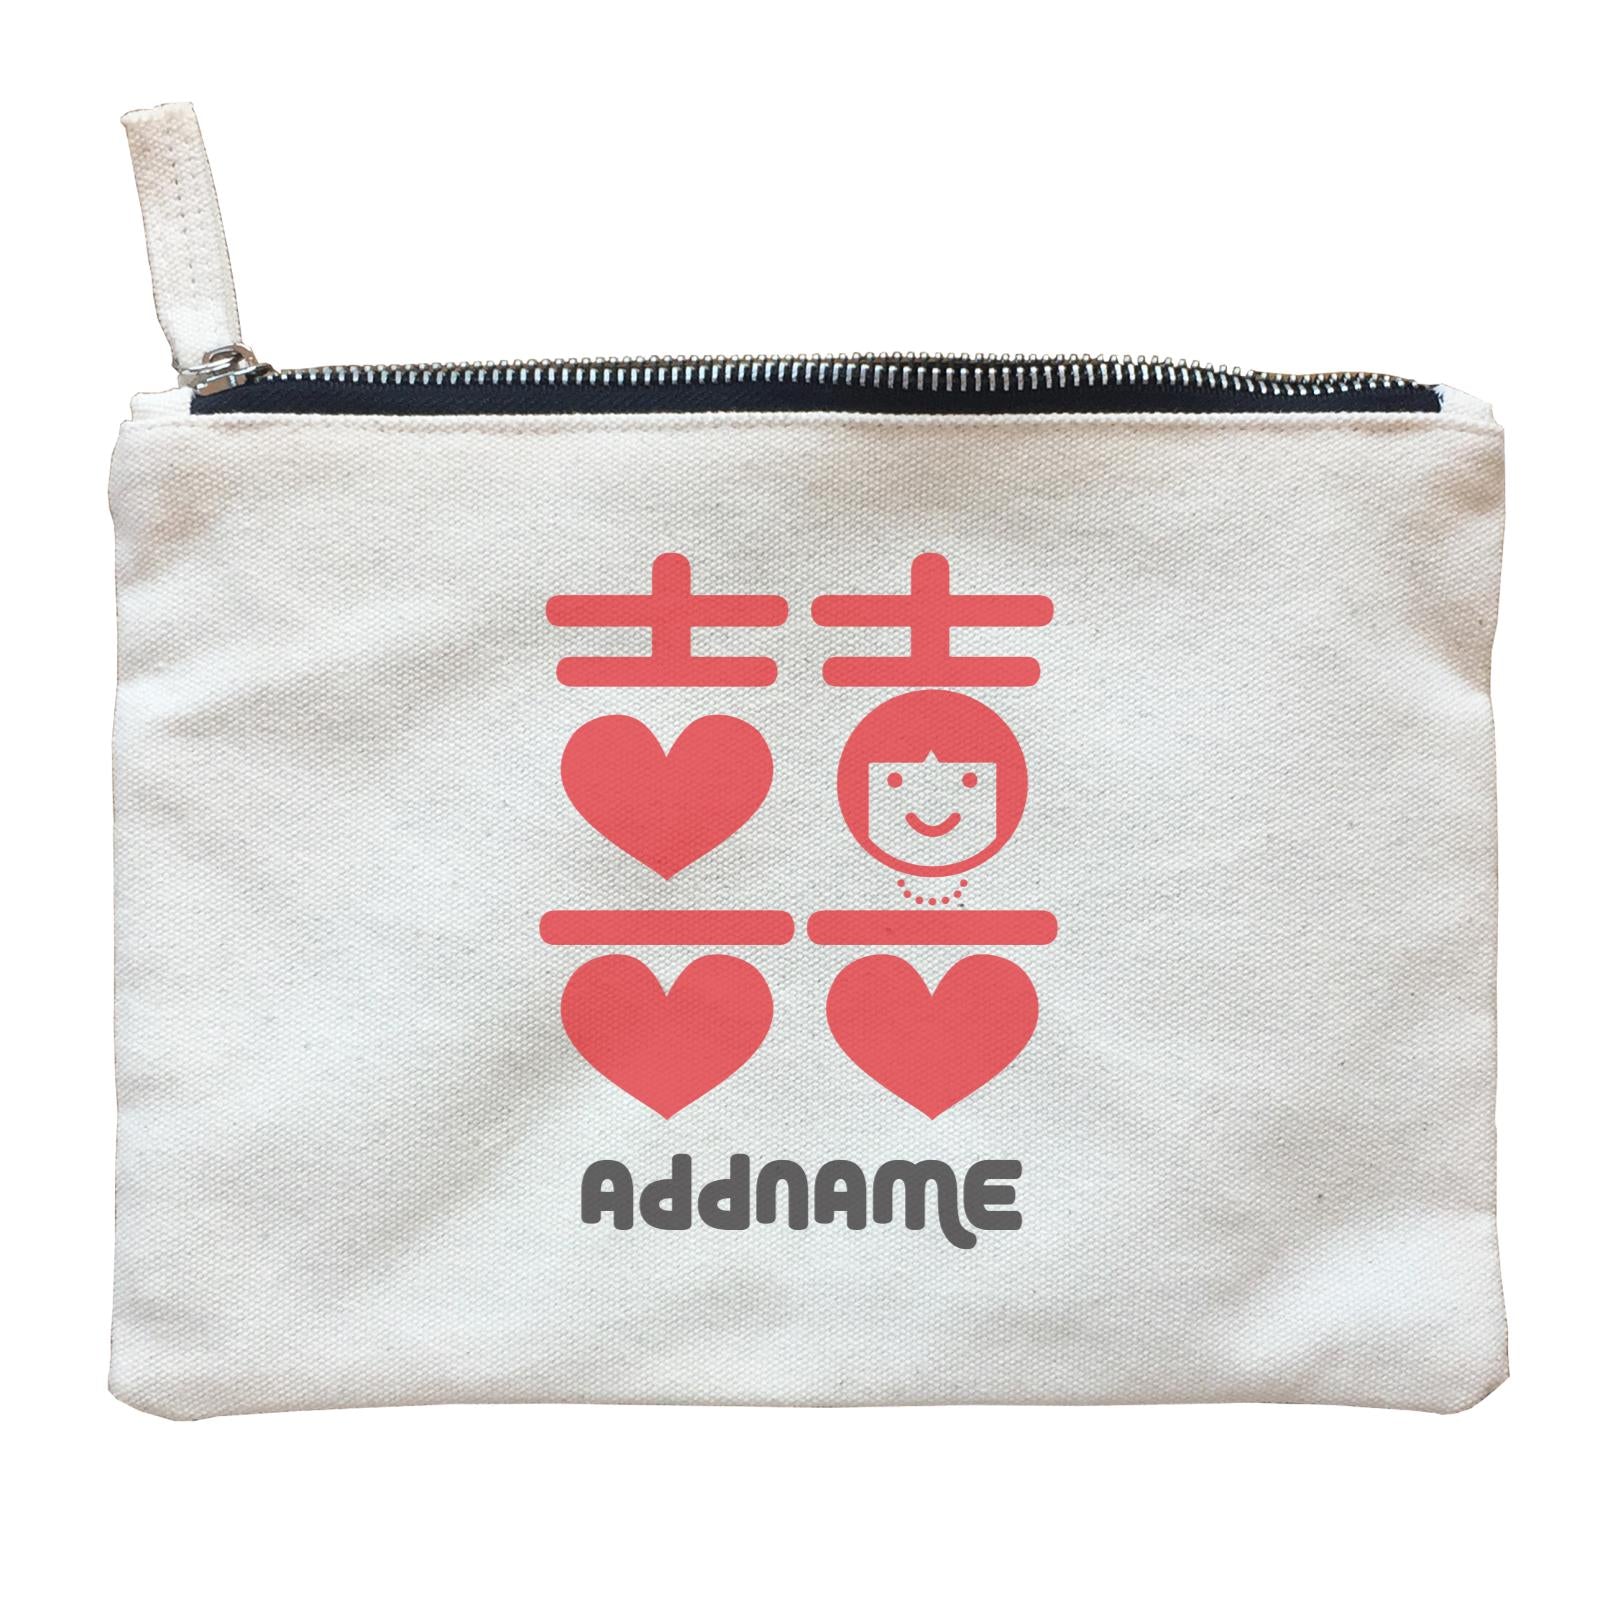 Double Happiness Wedding Bride Addname Zipper Pouch